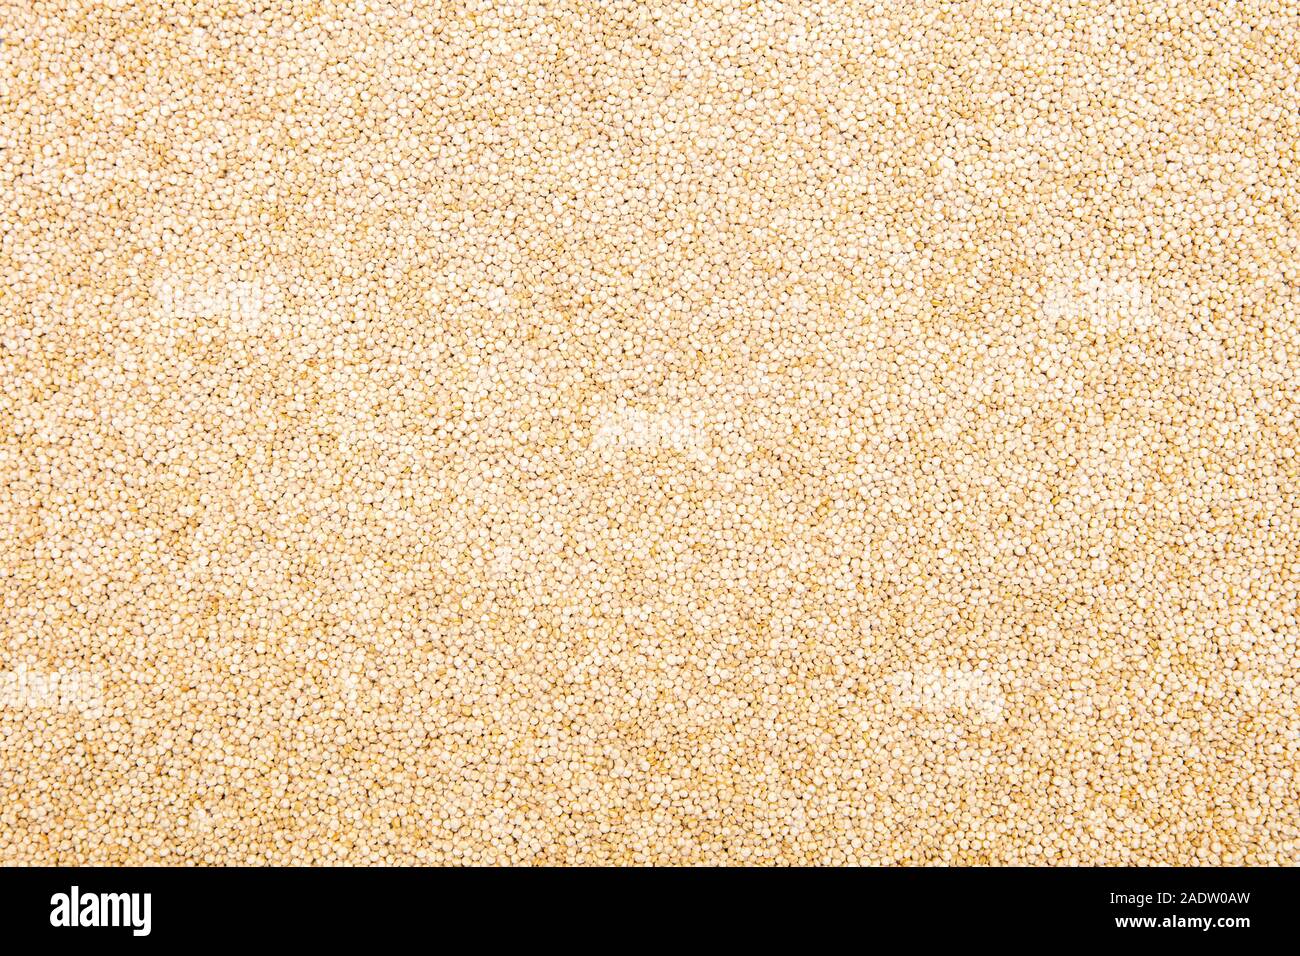 Topview background, uncooked and raw quinoa seeds, grain Stock Photo